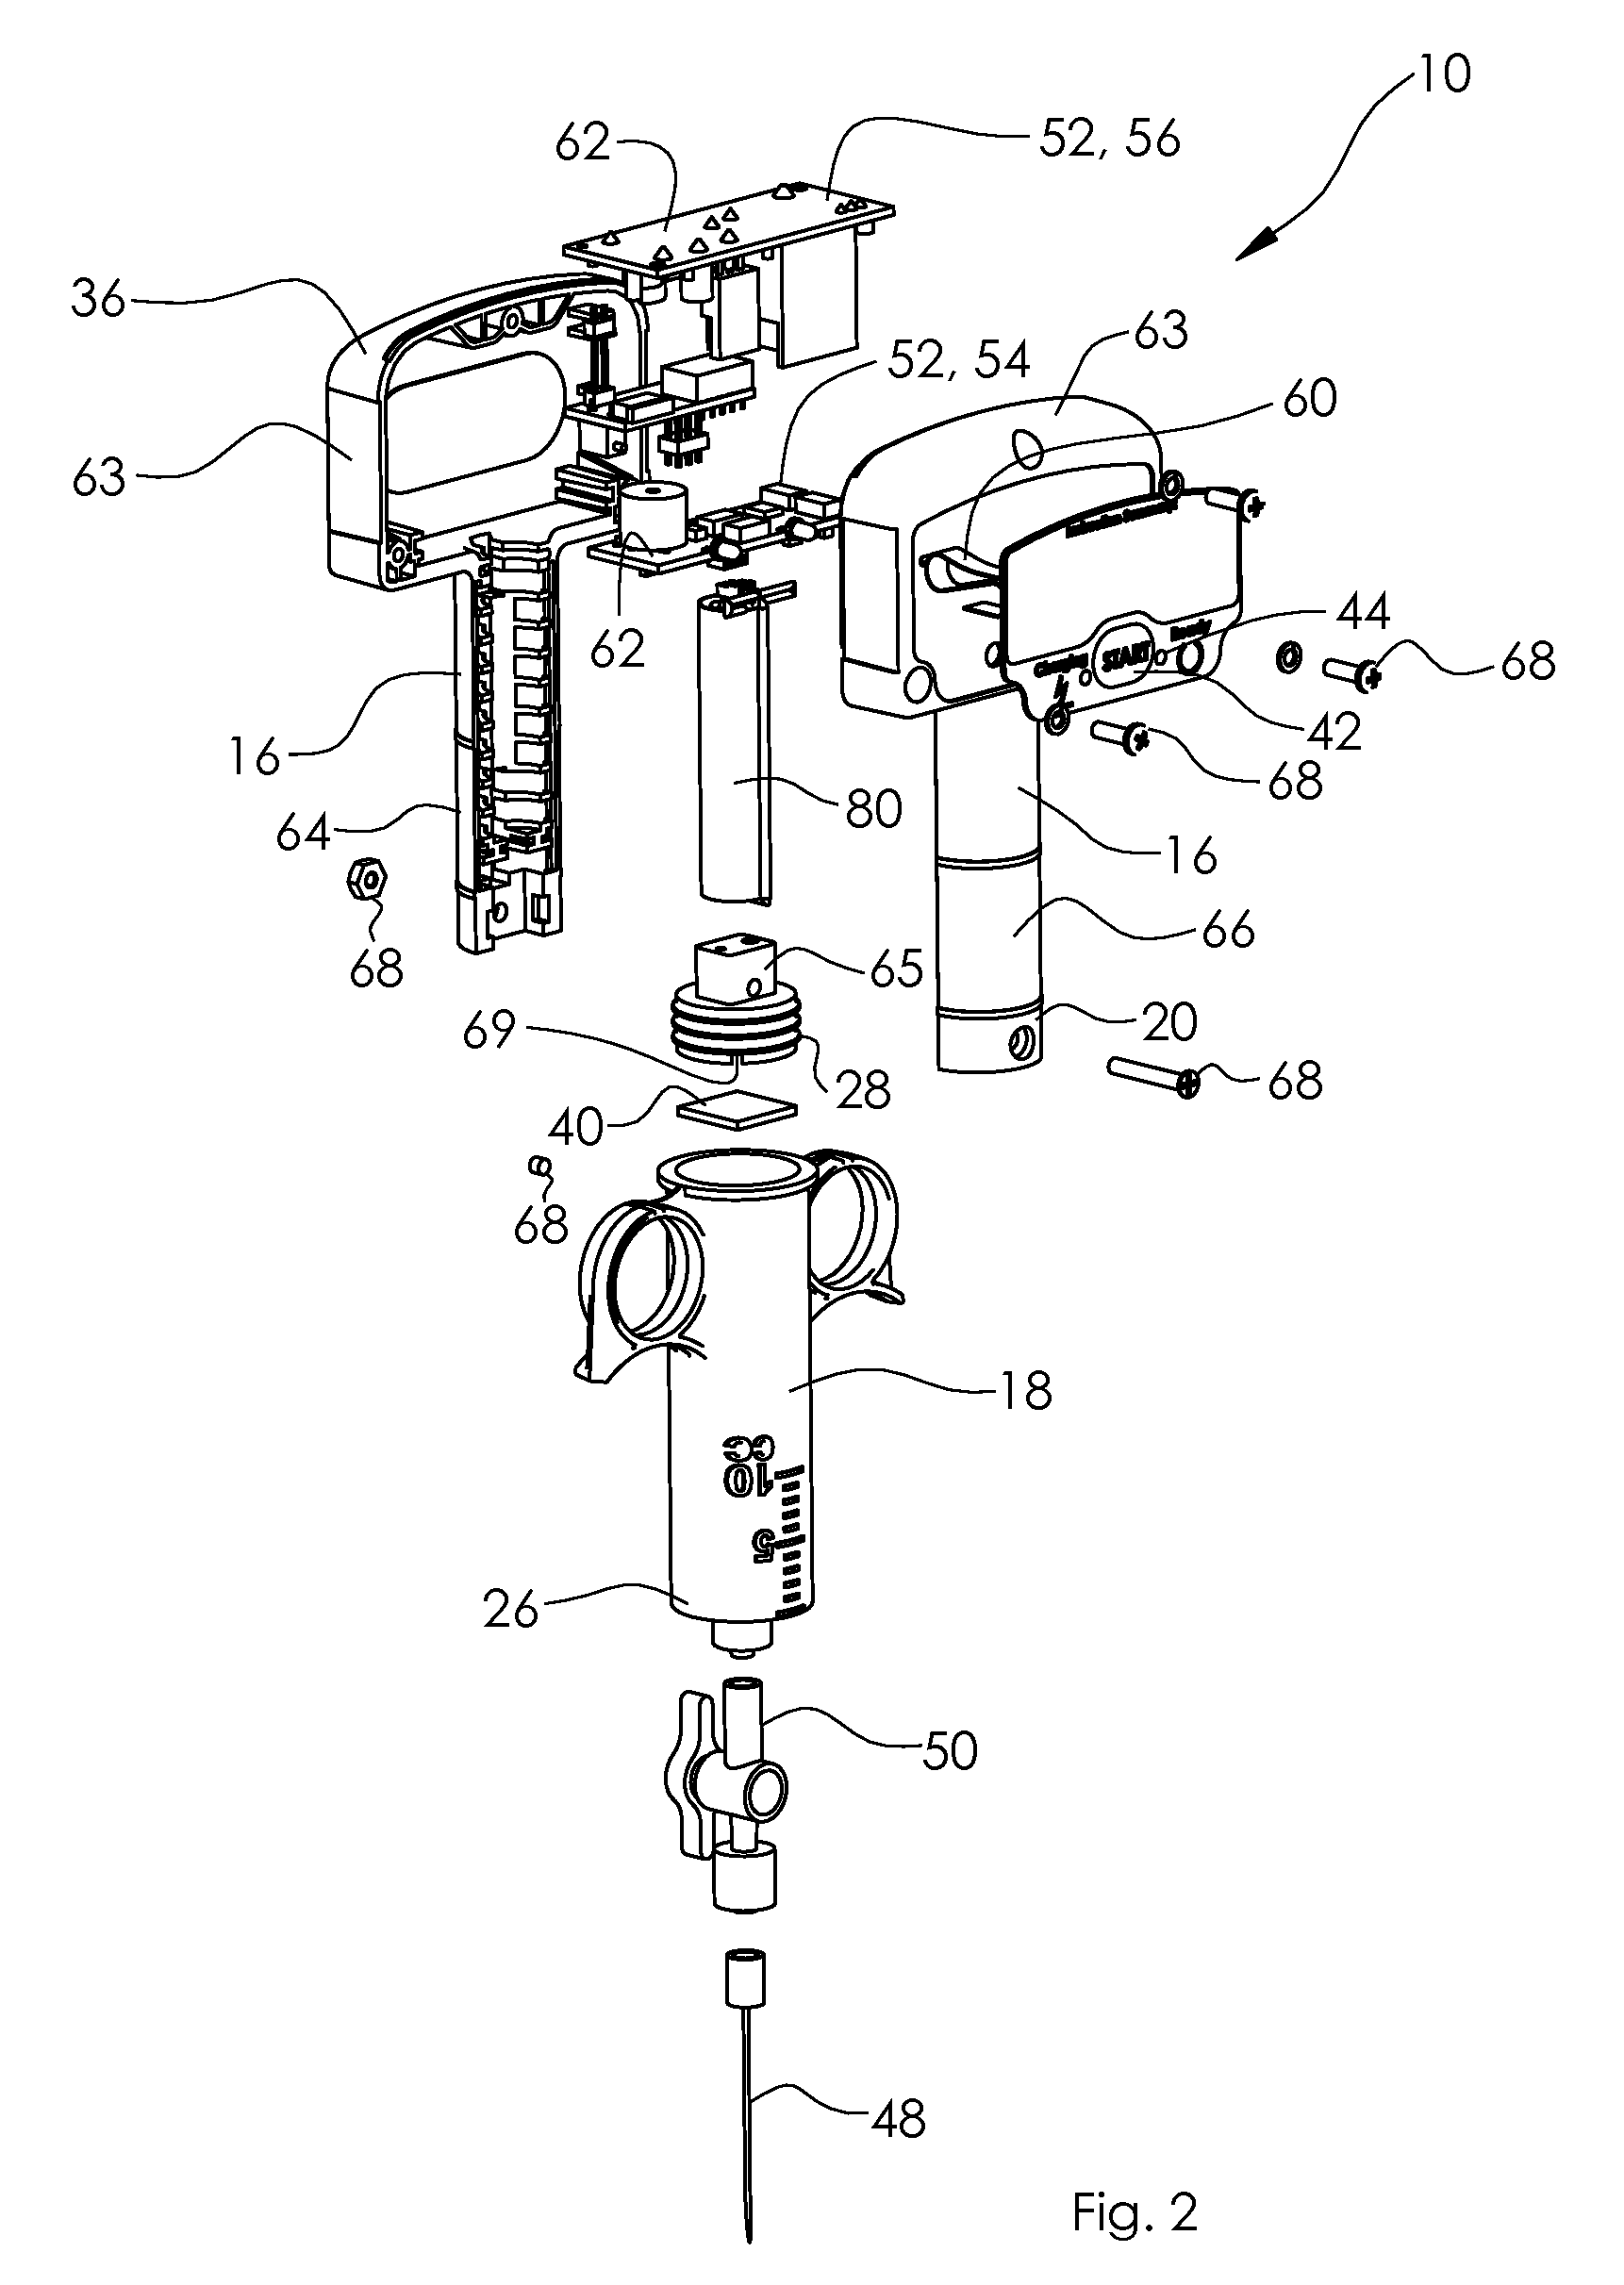 Apparatus and Method For Treating and Dispensing a Material Into Tissue